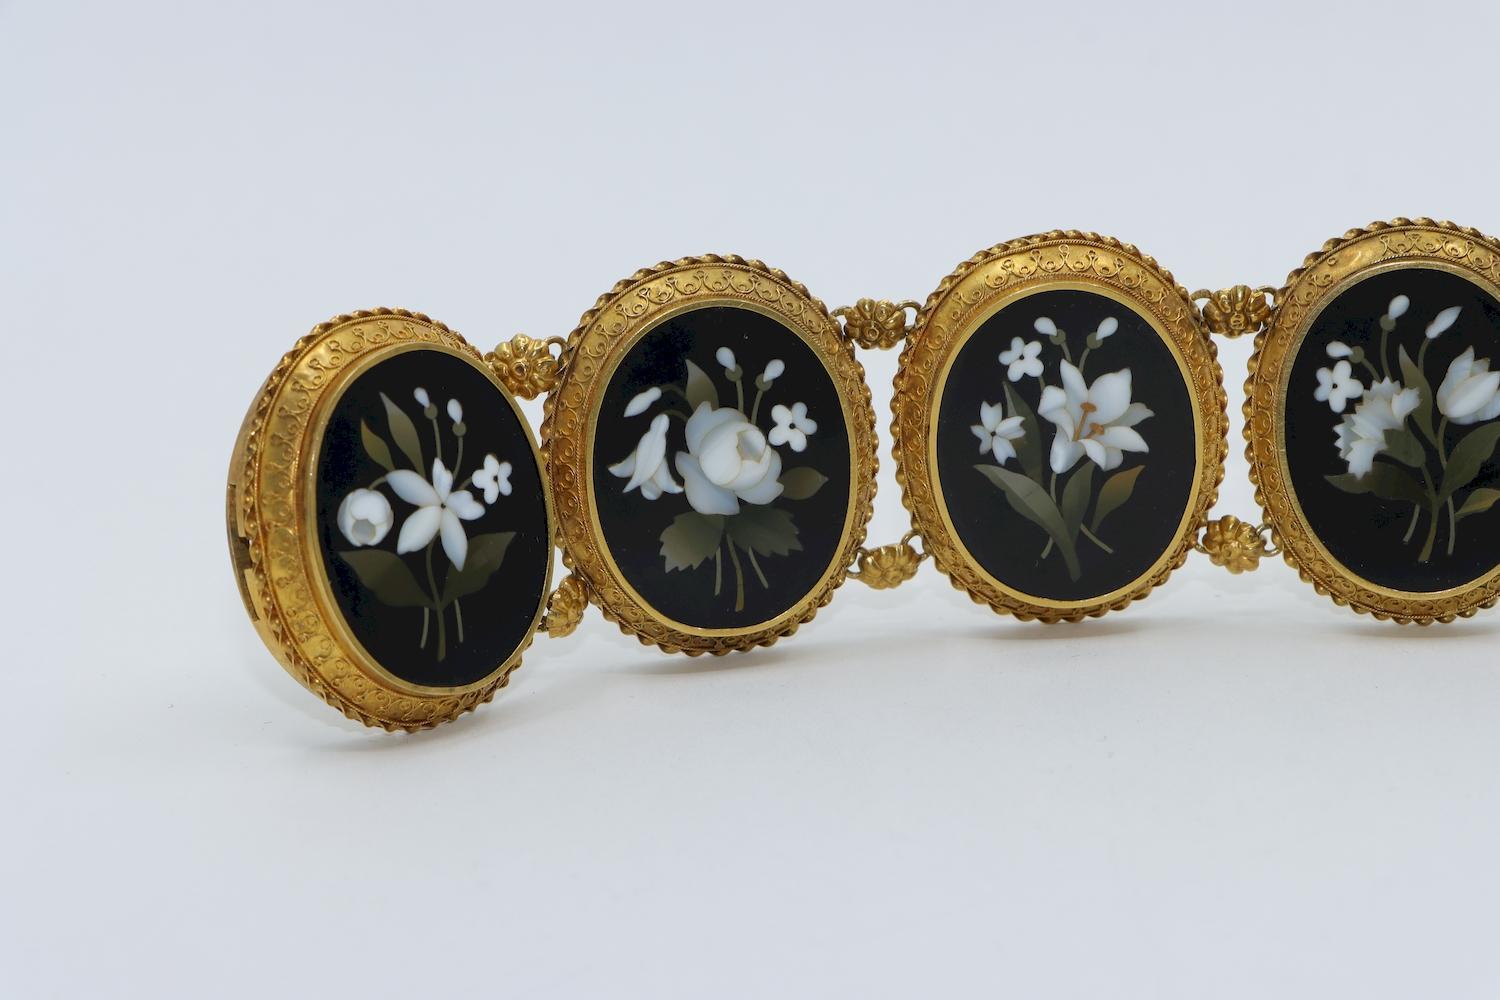 Victorian 18K Gold Pietra Dura Bracelet

Approximate Dimensions:
20 cm (Unclasped Length) 
3.8 cm (Width) 
46.8 grams in weight.